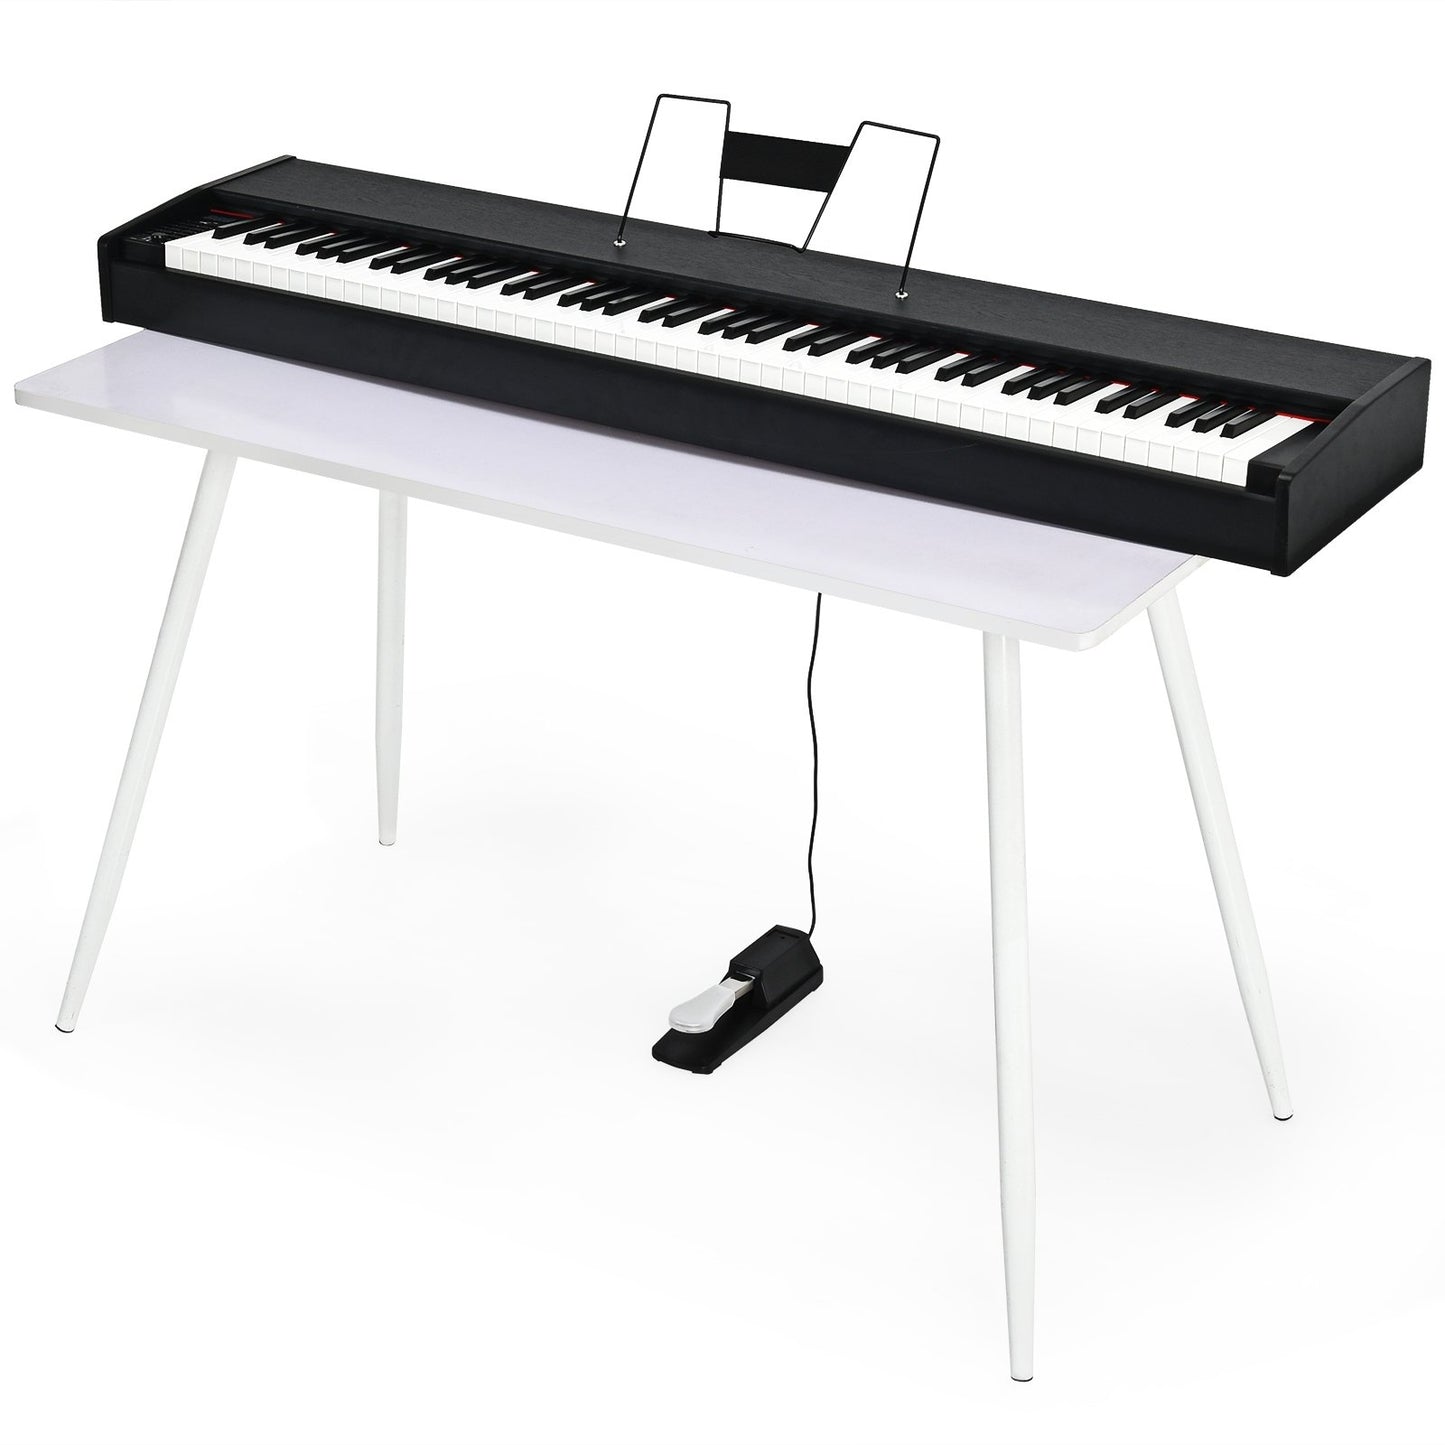 88-Key Full Size Digital Piano Weighted Keyboard with Sustain Pedal, Black